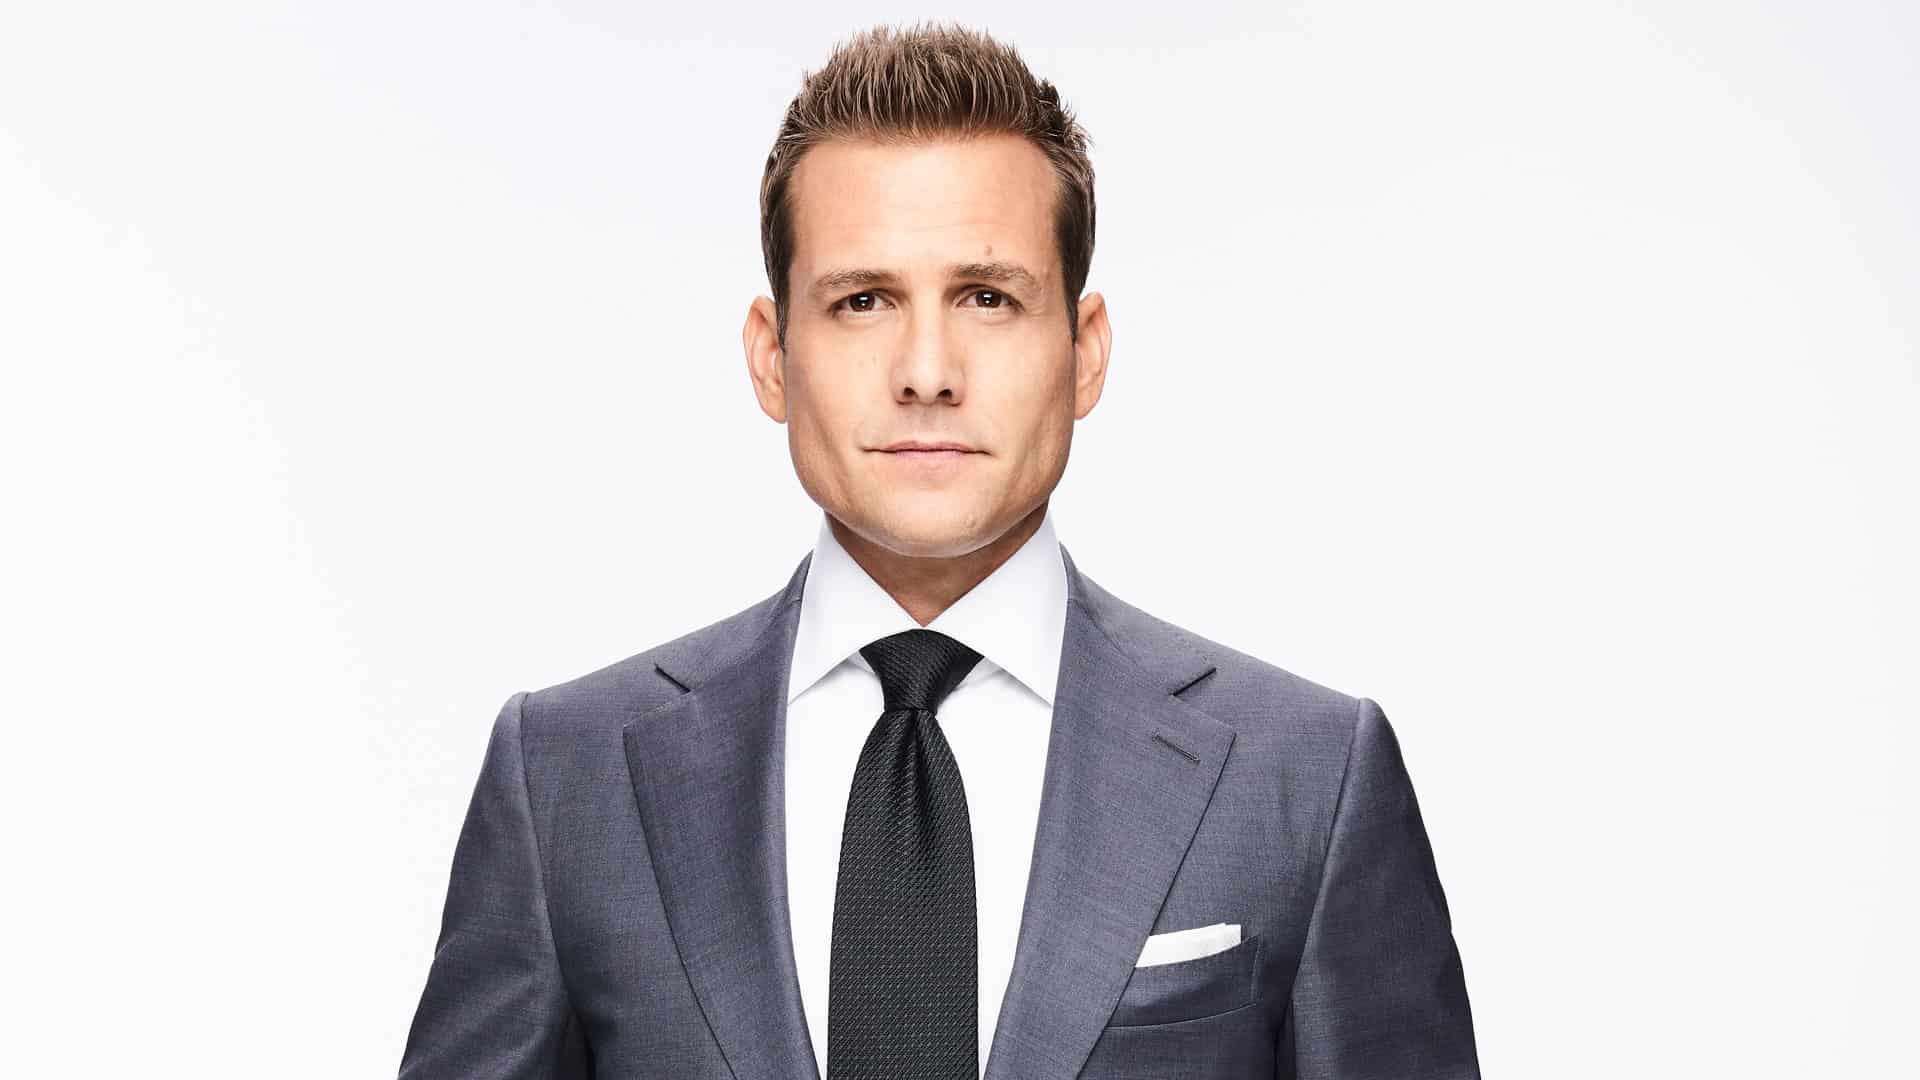 Inspiring Harvey Specter Quotes & Sayings (2021)